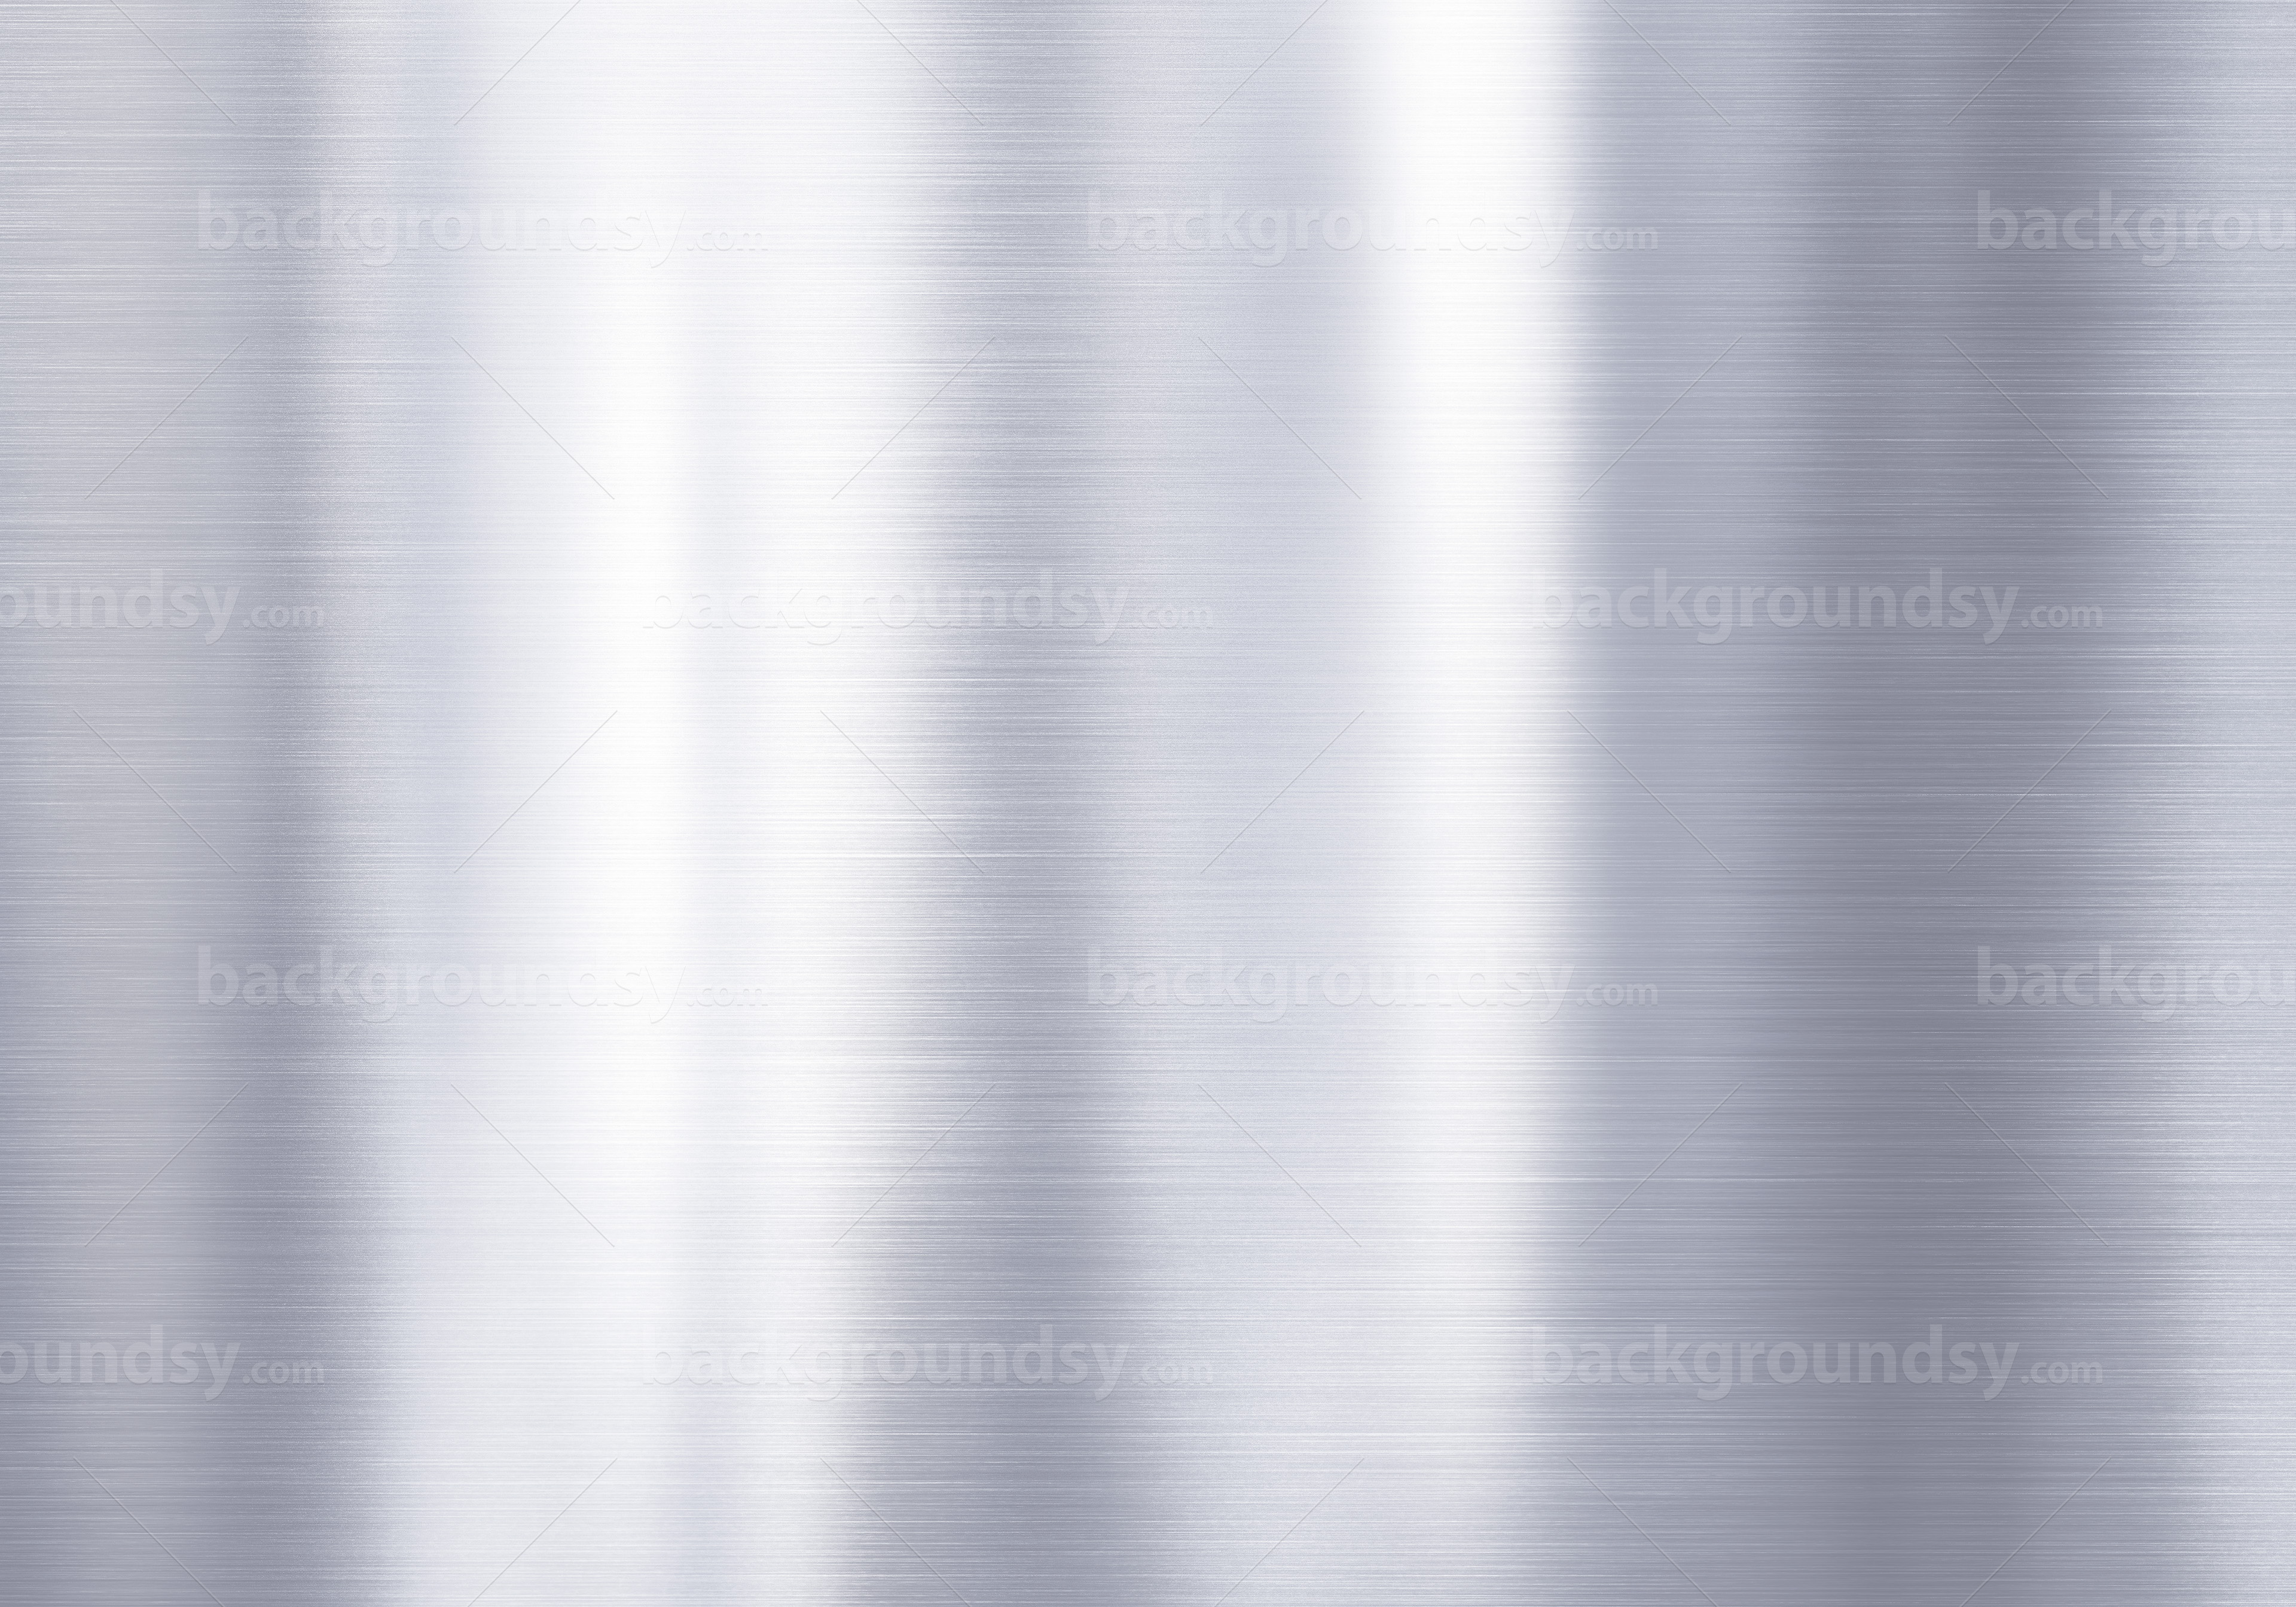 Bright metal surface | Backgroundsy.com